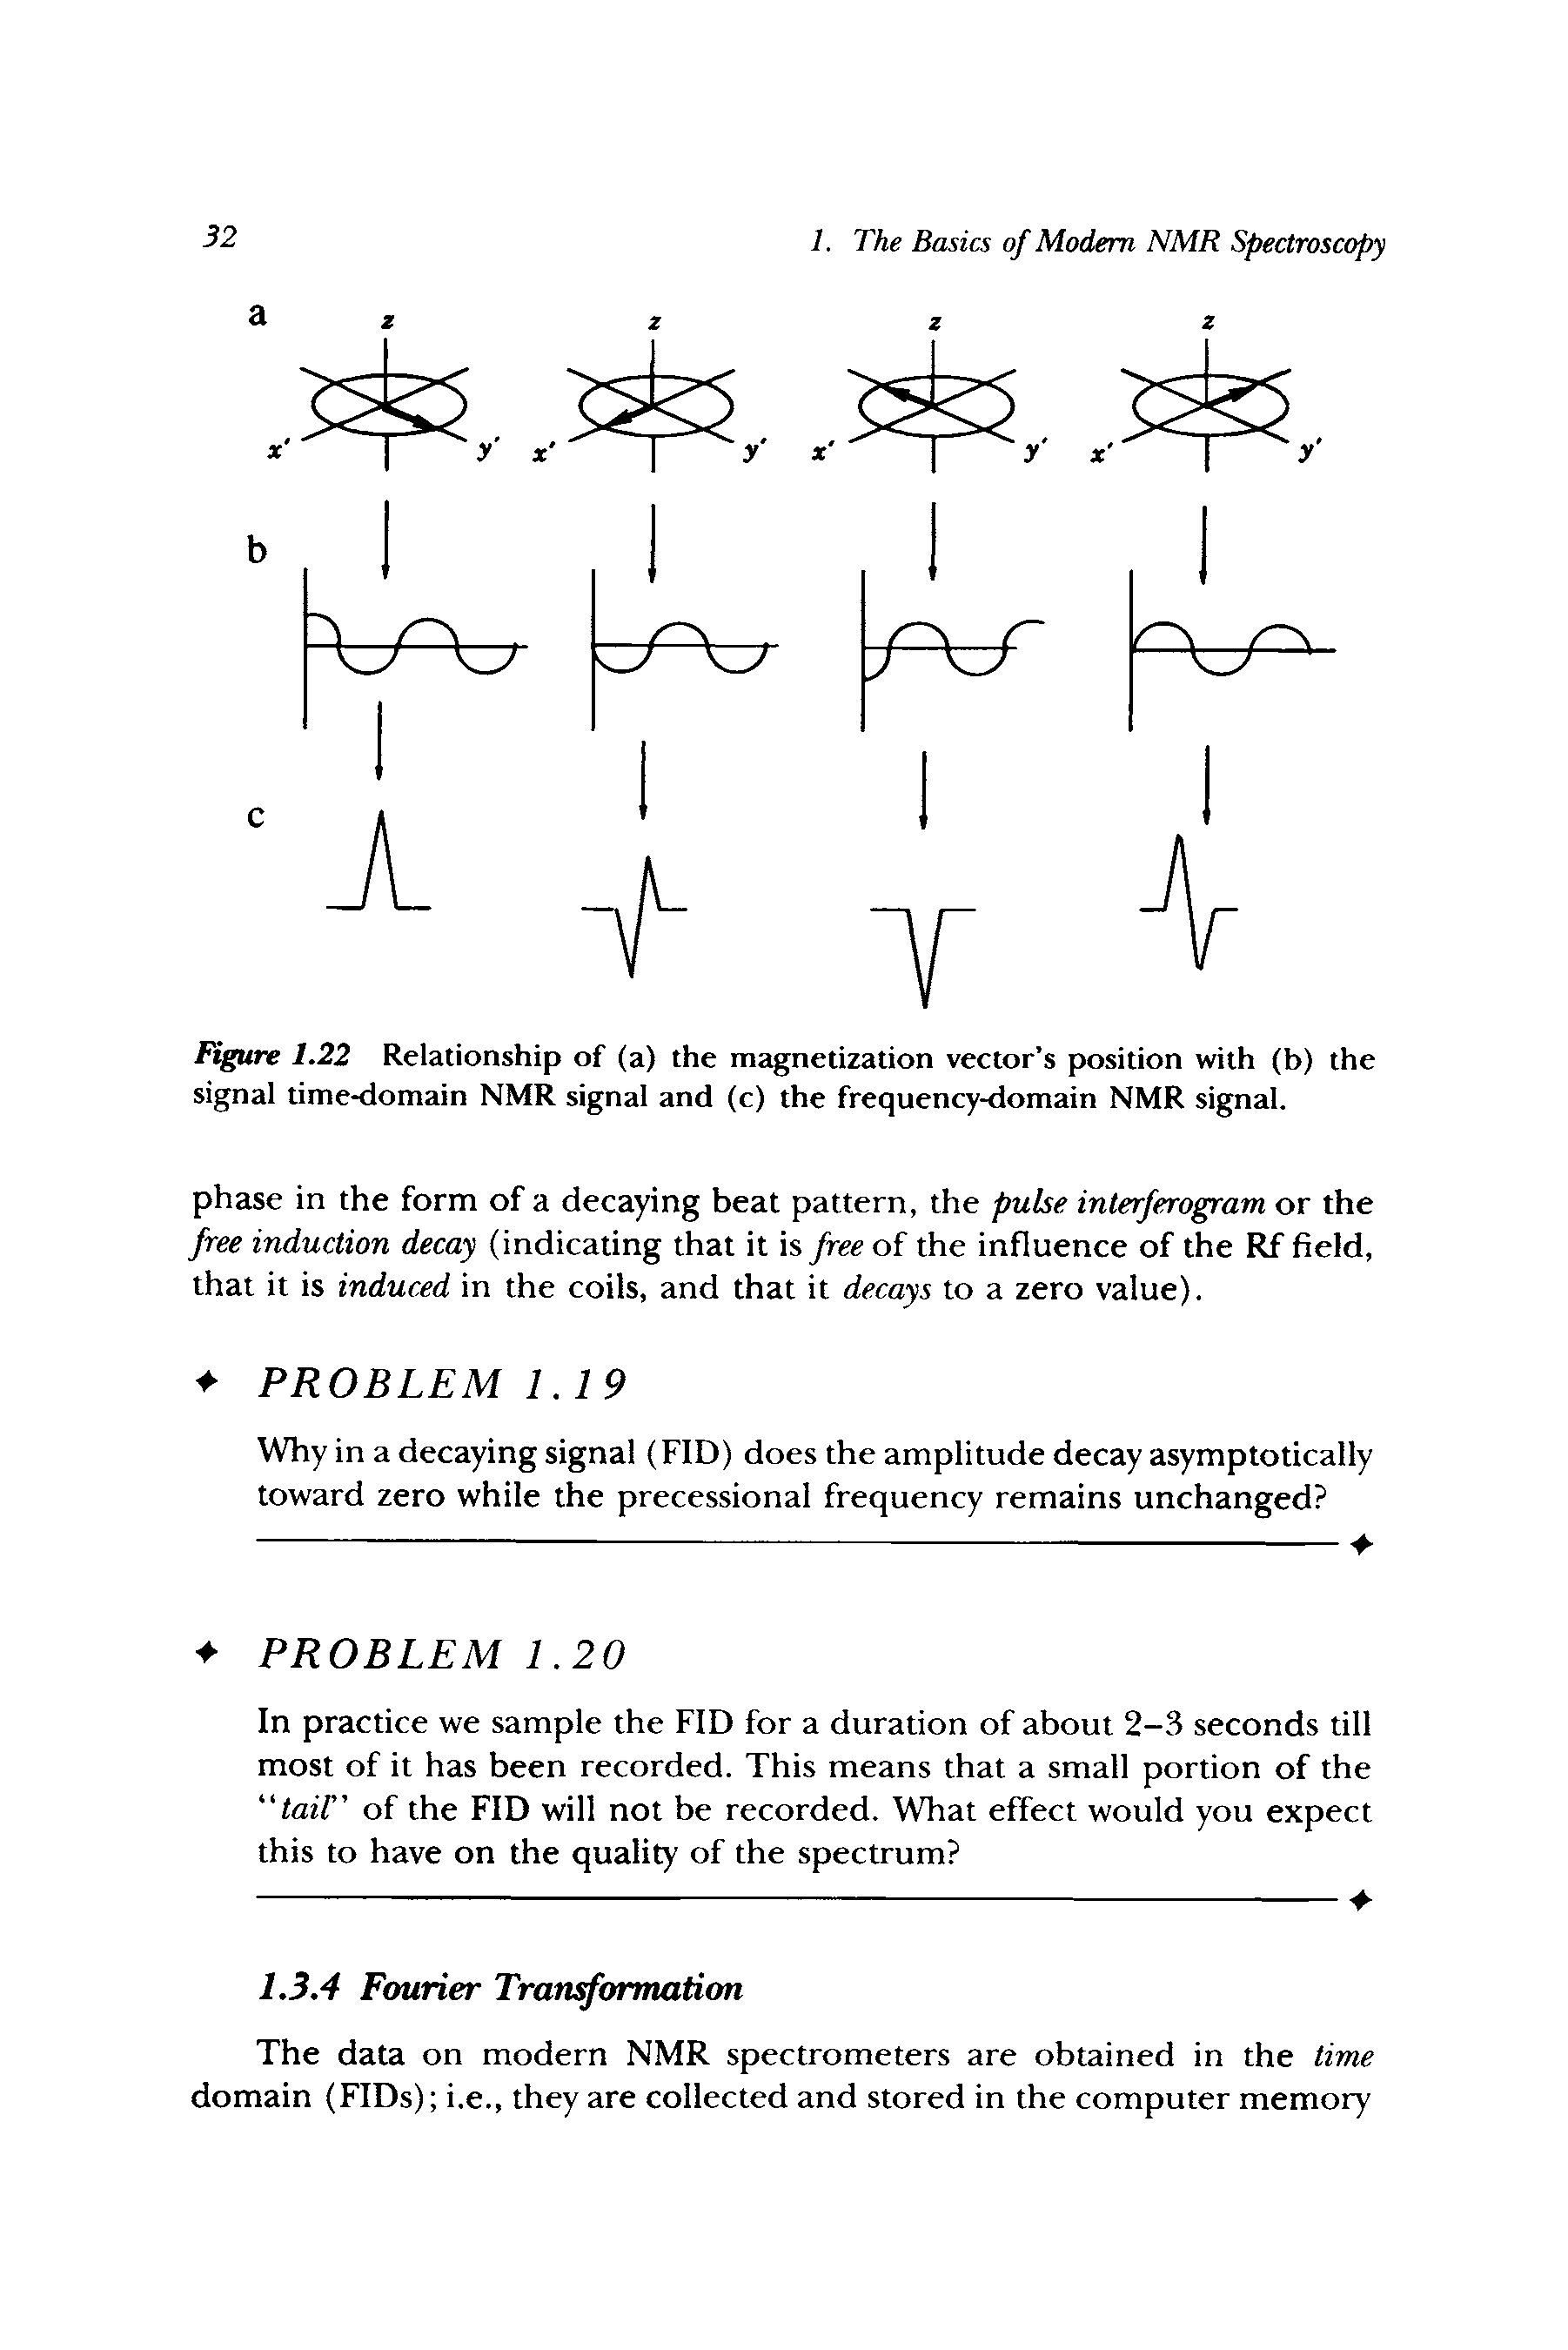 Figure 1.22 Relationship of (a) the magnetization vector s position with (b) the signal time-domain NMR signal and (c) the frequency-domain NMR signal.